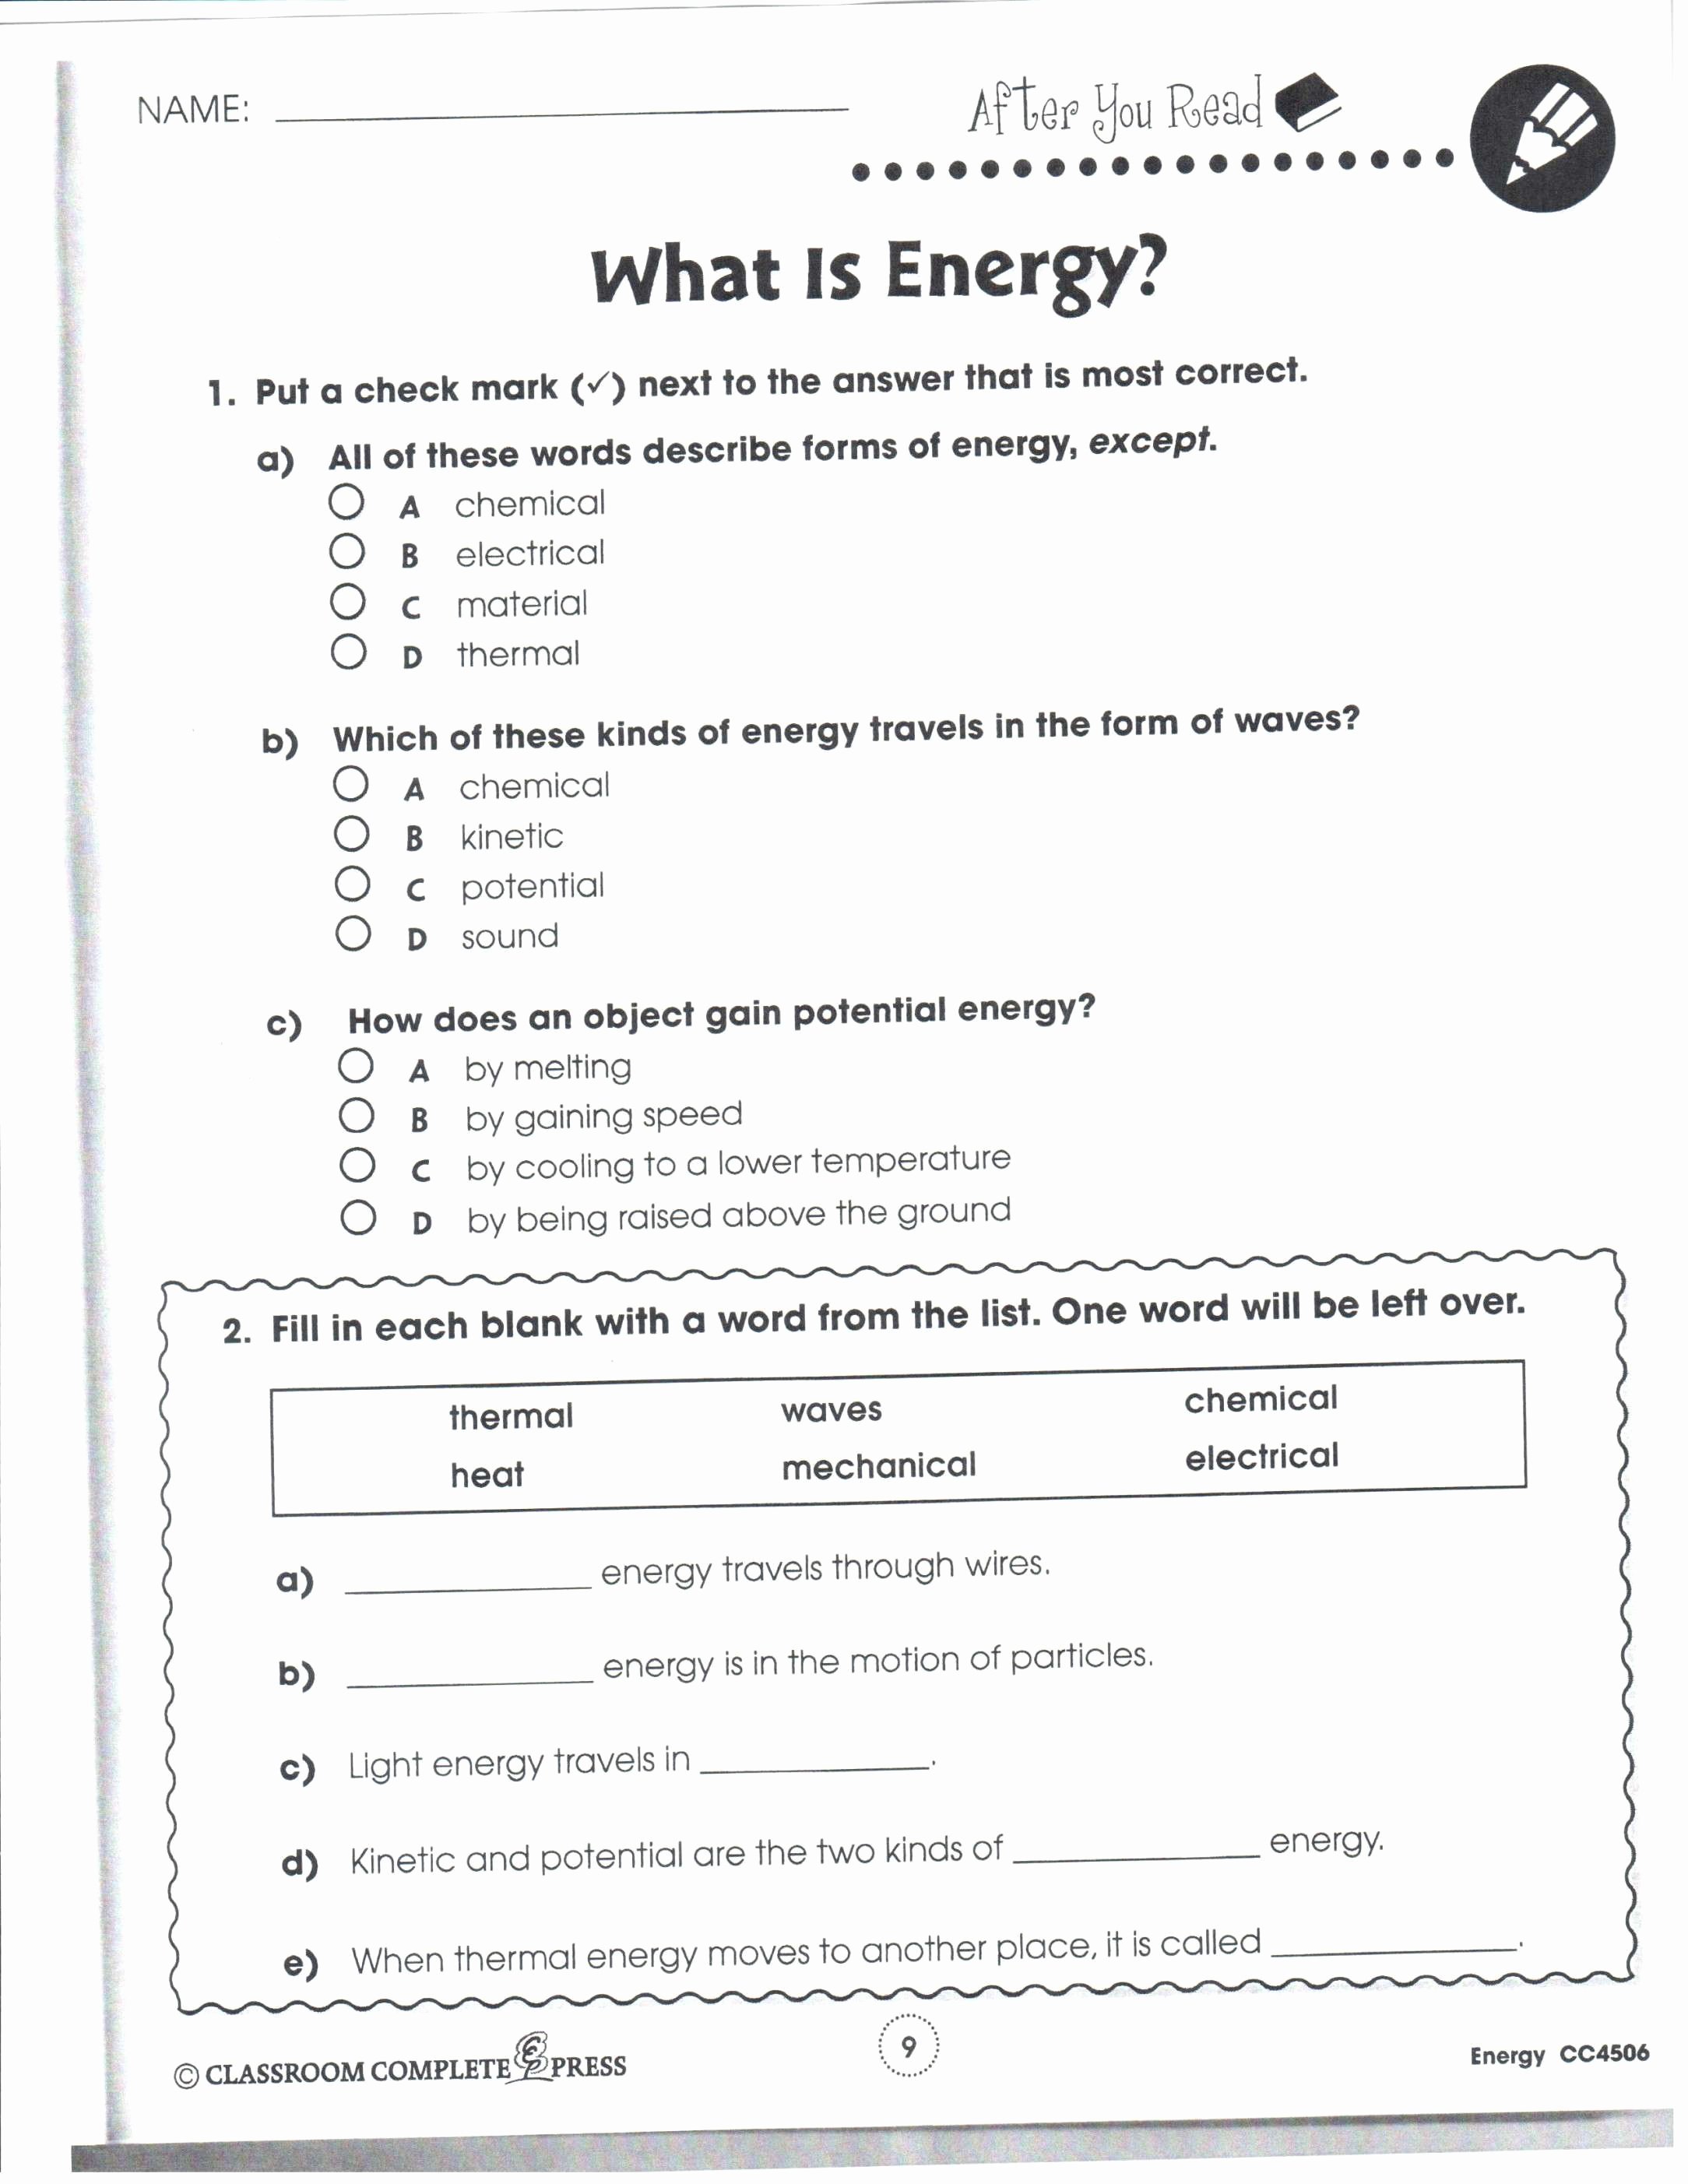 Work Power and Energy Worksheet Beautiful Work Energy and Power Worksheet Answers Physics Classroom